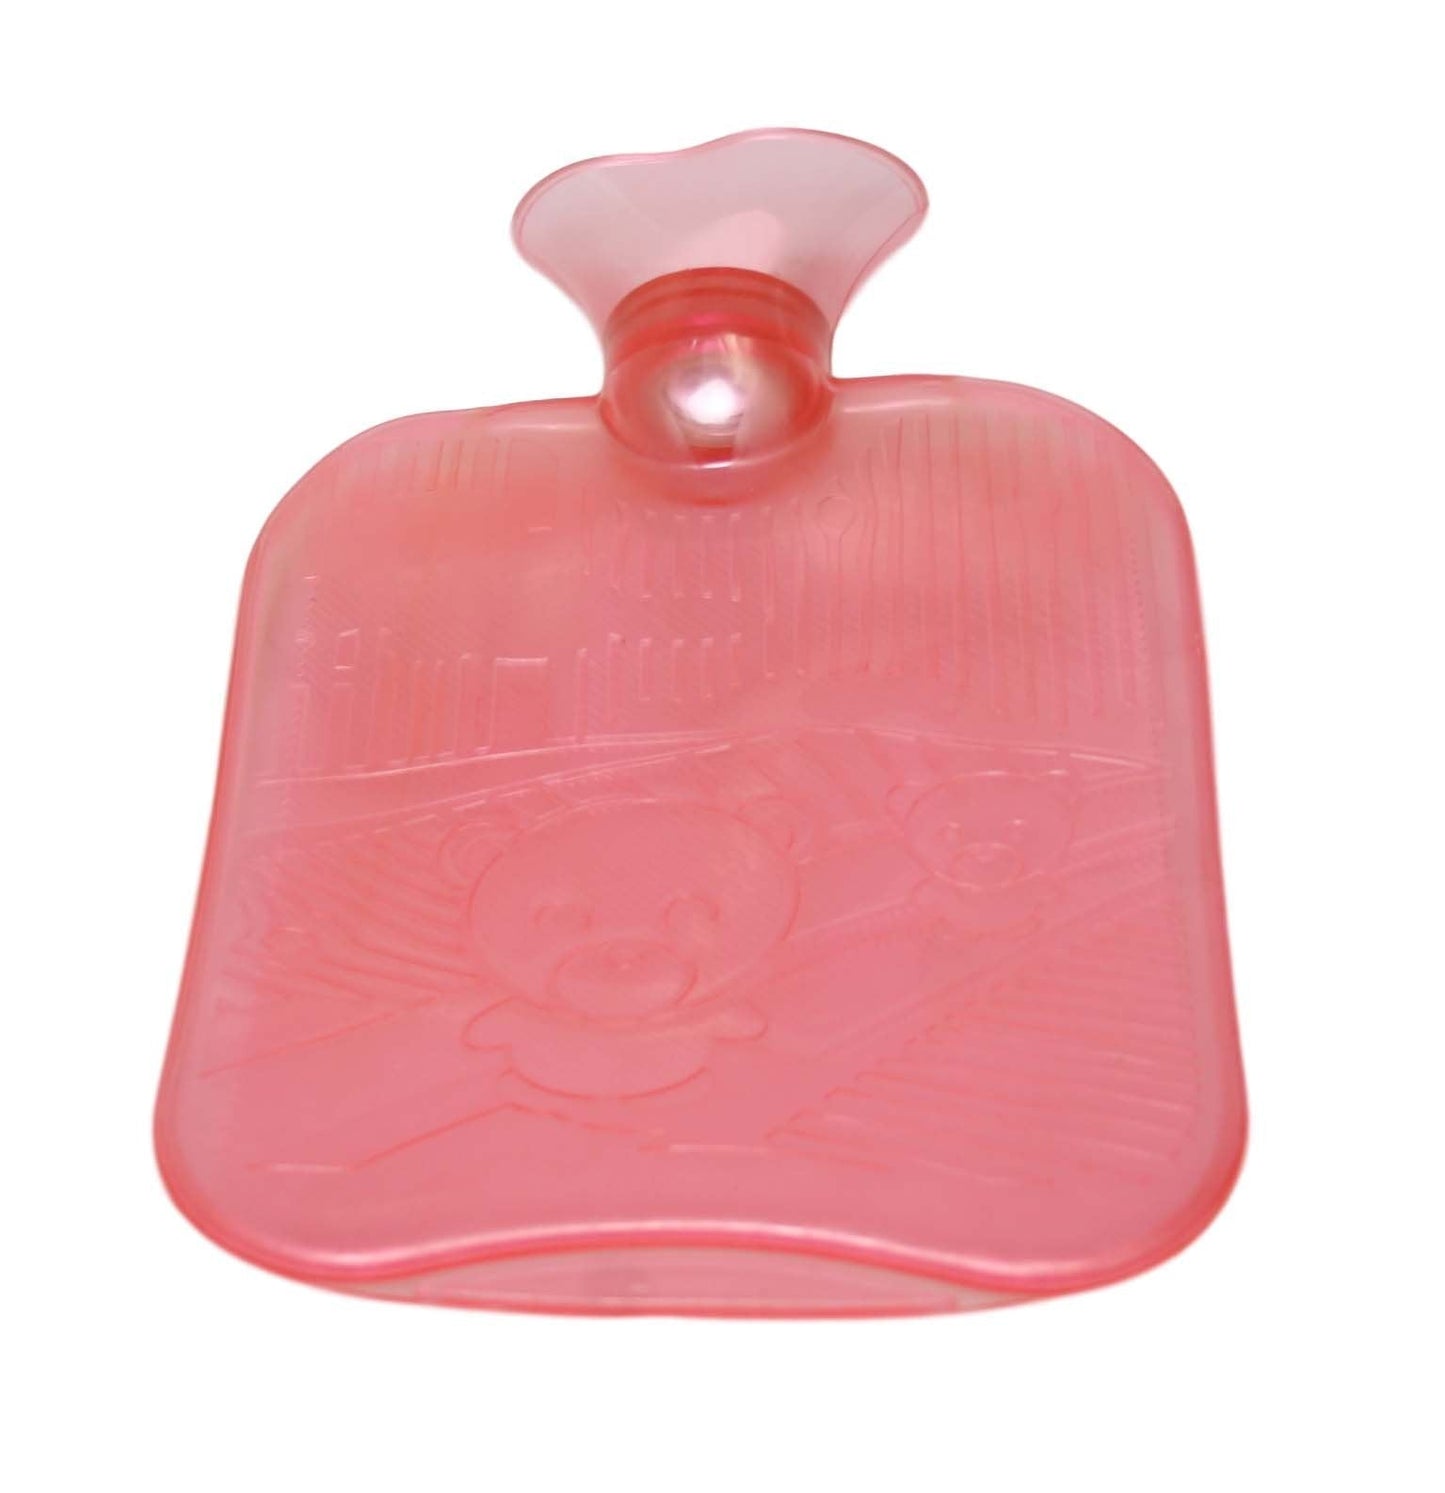 Clear Silicone Hot Water Bottle Red/Purple Hot Therapy Pain Relief Water Bottle 18cm x 20cm 6433 1 ltr  (Parcel Rate)